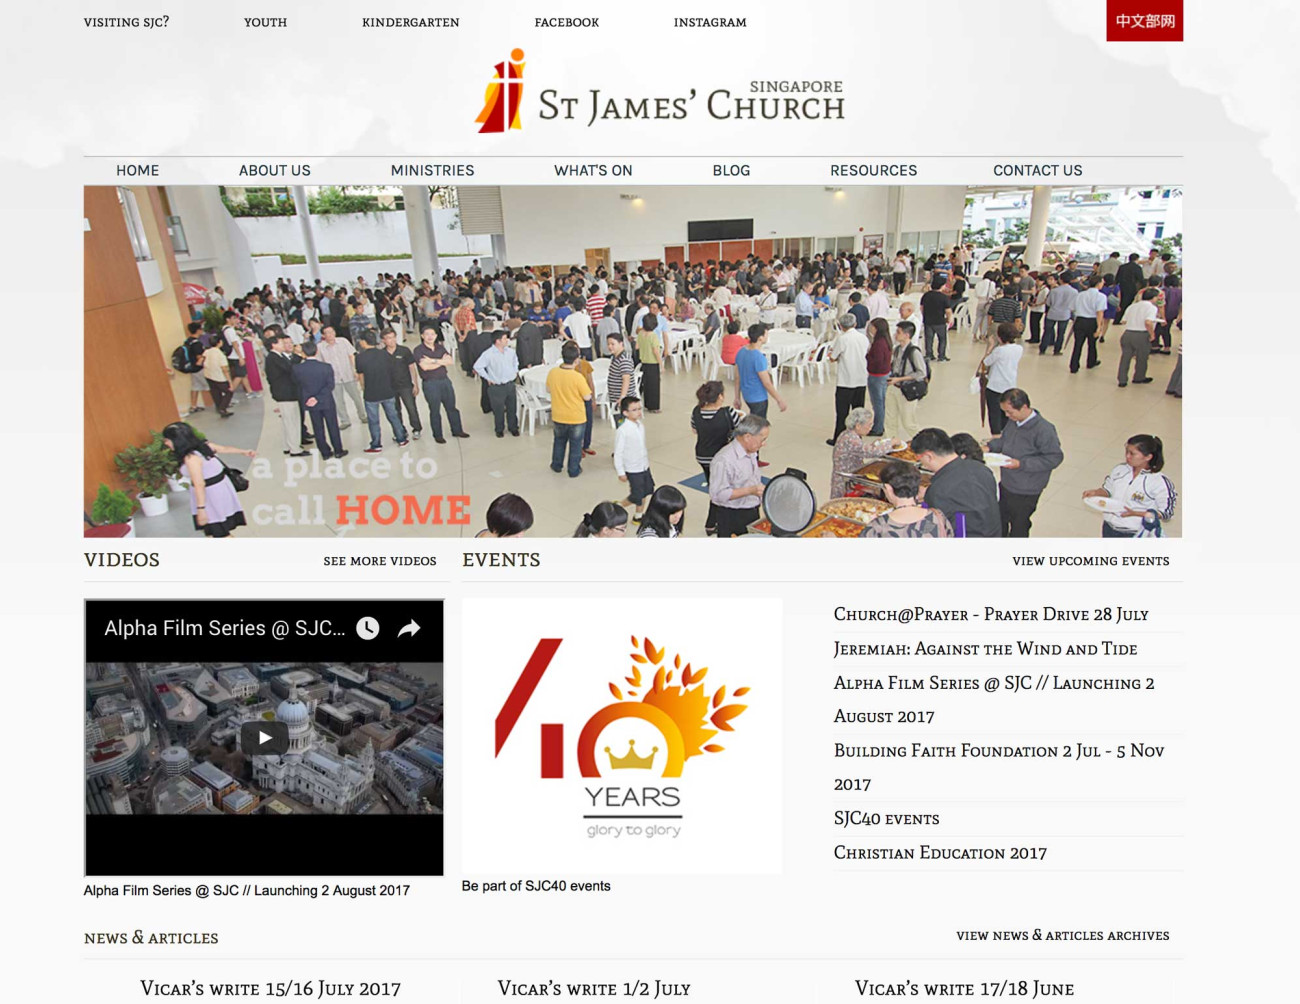 Screenshot of St. James' Church website home page